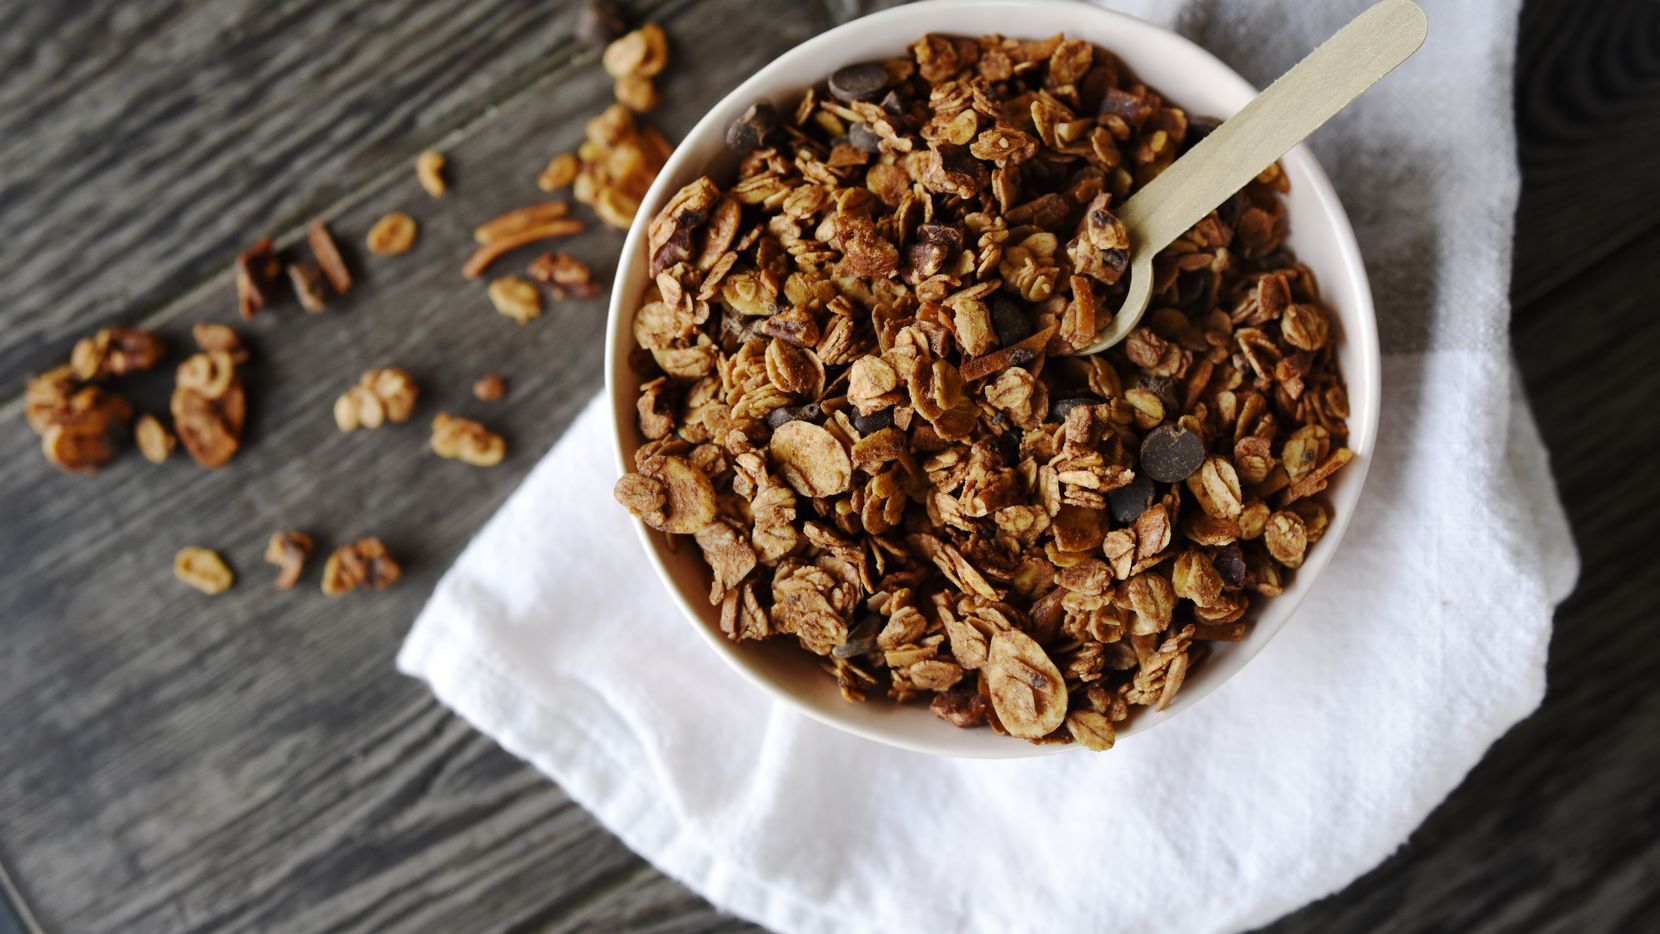 A bowl of granola with dark chocolate from Park Lane Pantry